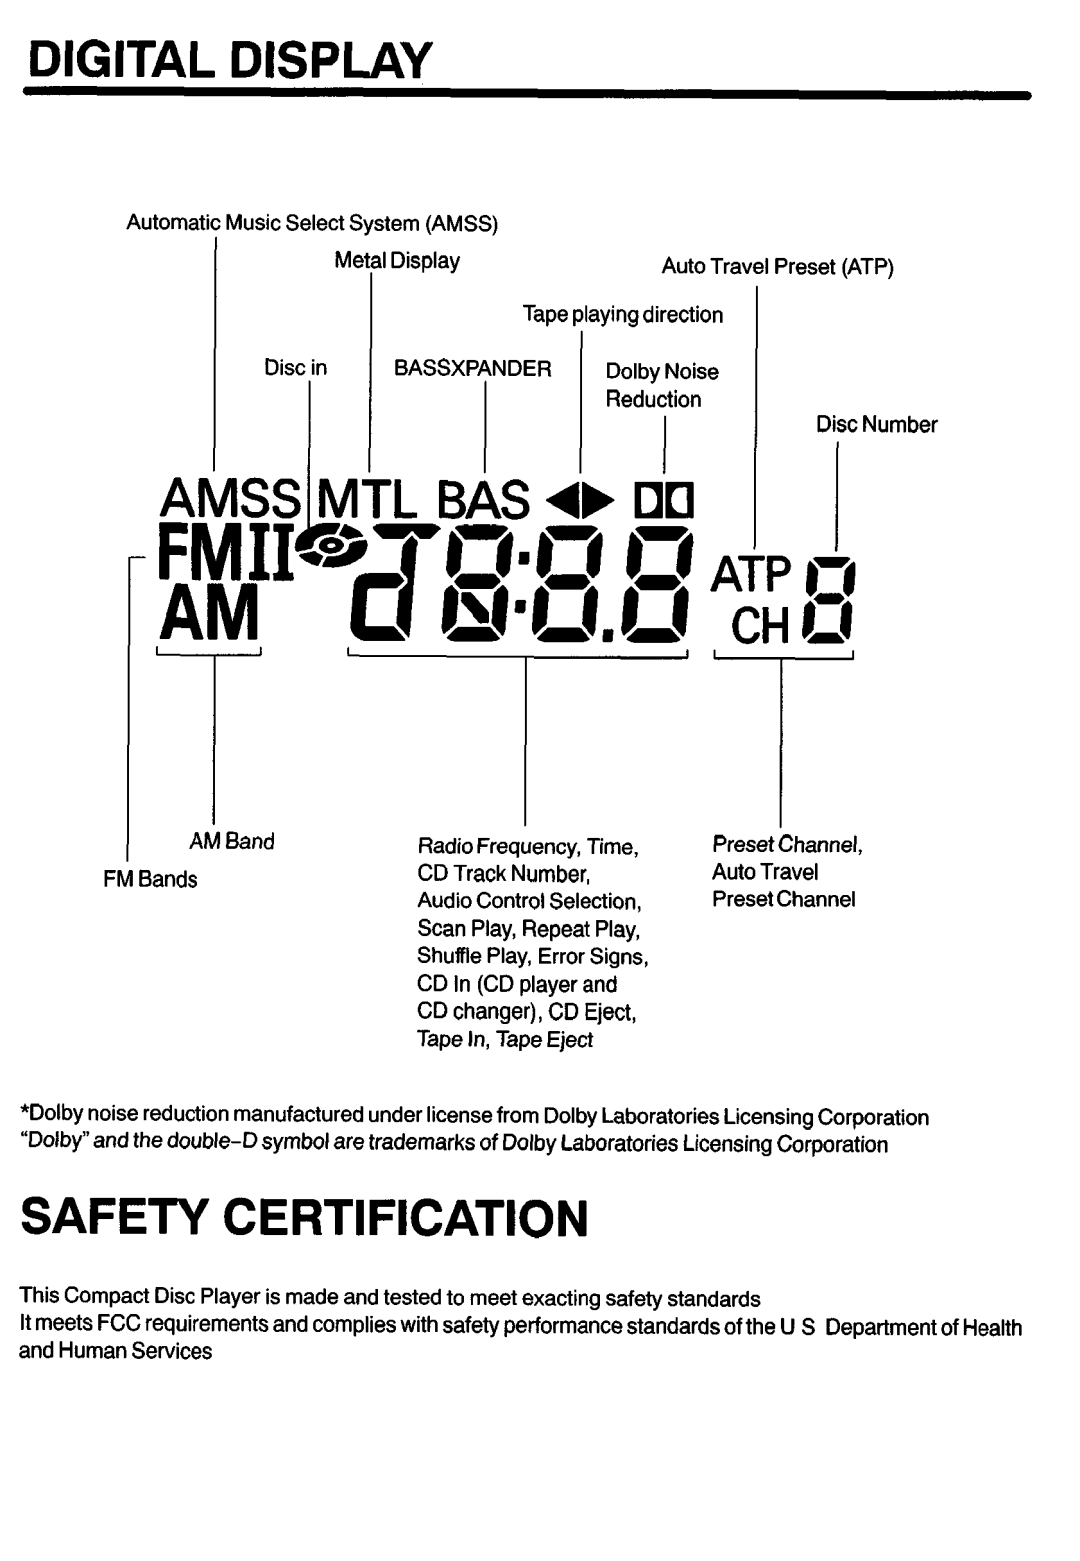 Sanyo FXCD-500 manual Digital Display, Safety Certification 